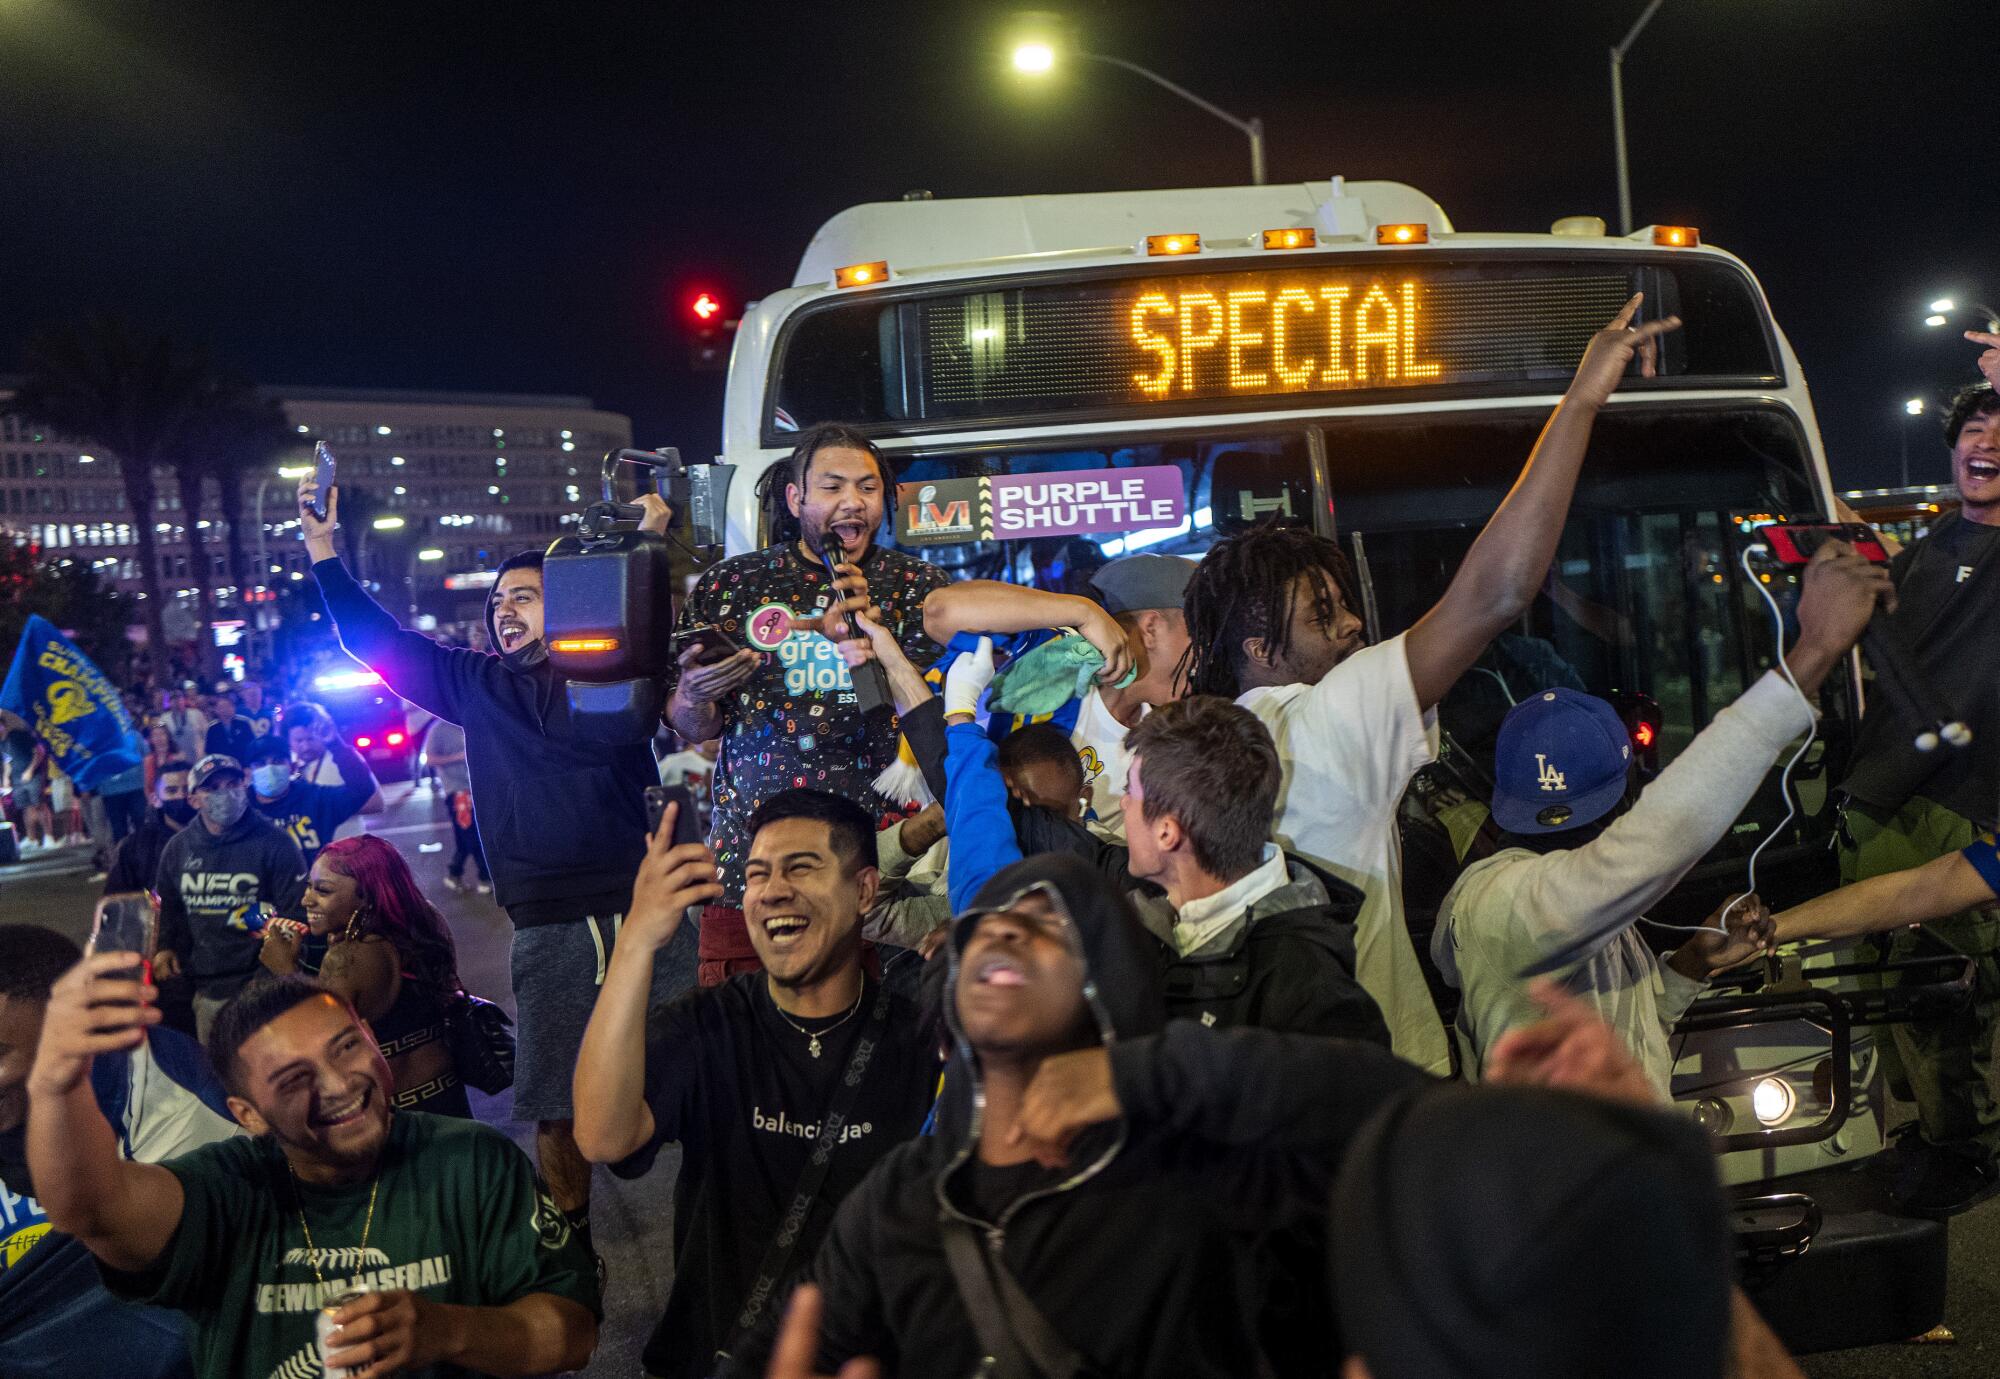 Football fans block a bus as they celebrate outside SoFi Stadium after the Los Angels Rams defeated the Cincinnati Bengals